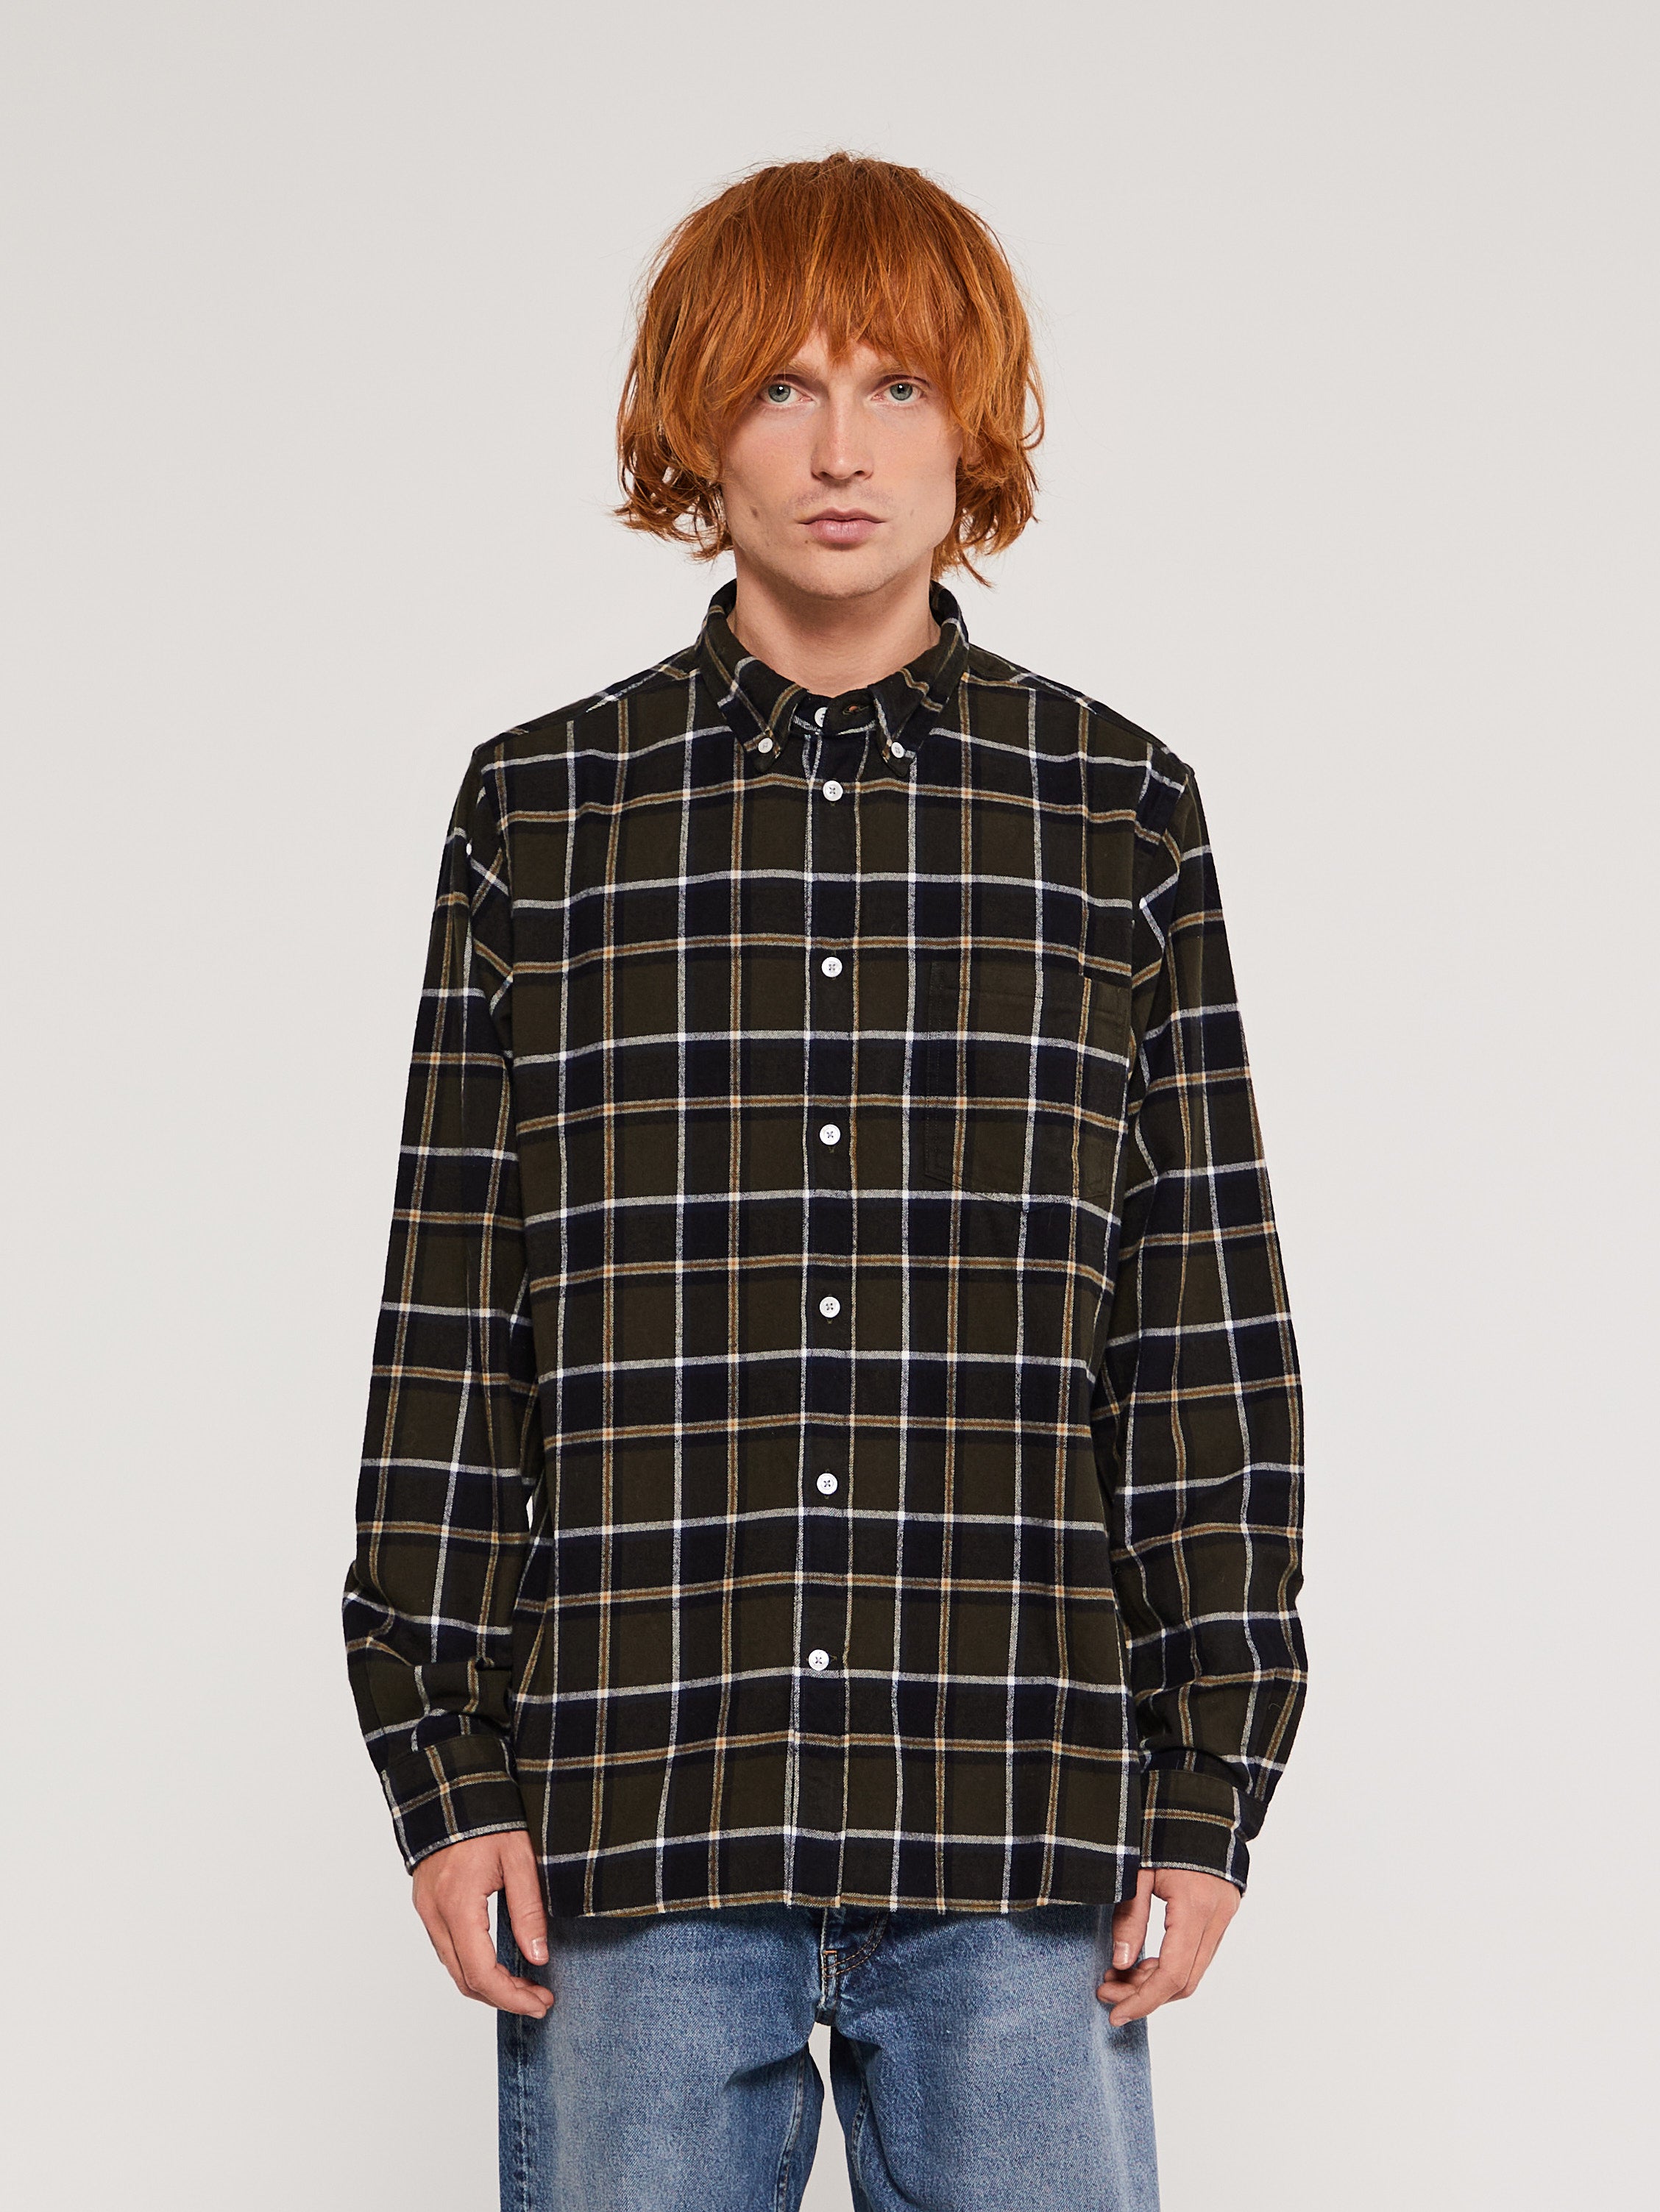 Norse Project - Anton Check Shirt in Beech Green